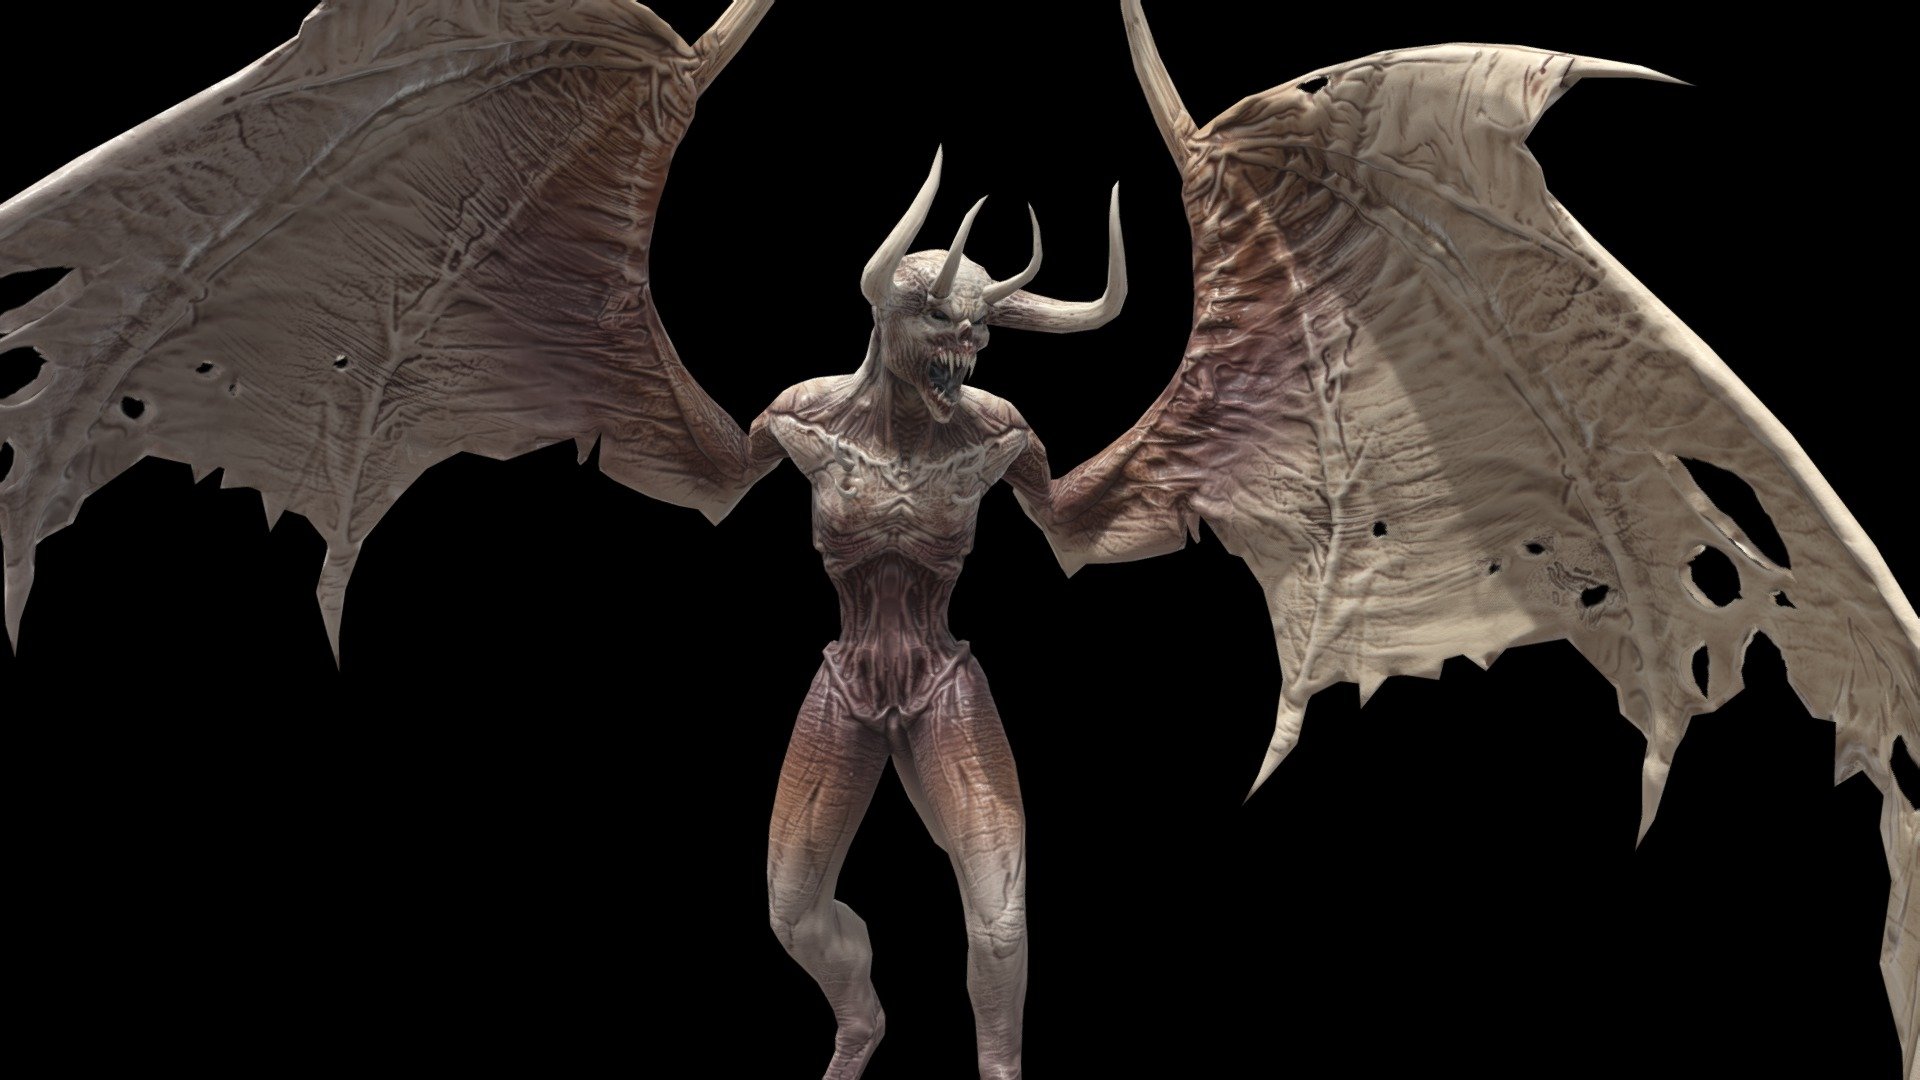 Low-poly model of the character FlyingDemon1
Suitable for games of different genre: RPG, strategy, first-person shooter, etc.

Textures pack one 4096x4096 (down to 1024х1-1024)

In the model it is desirable to use a shader with a two-sided display of polygons.

The model contains 29 animations
attack (x5)
walking (x2)
running (x1)
Strafe LR (x2)
idle (x3)
death (x4)
rage
flying(x6)
turn180
gethit(x4)

faces 5508
verts 5248
tris 10492 - FlyingDemon1 - 3D model by dremorn 3d model